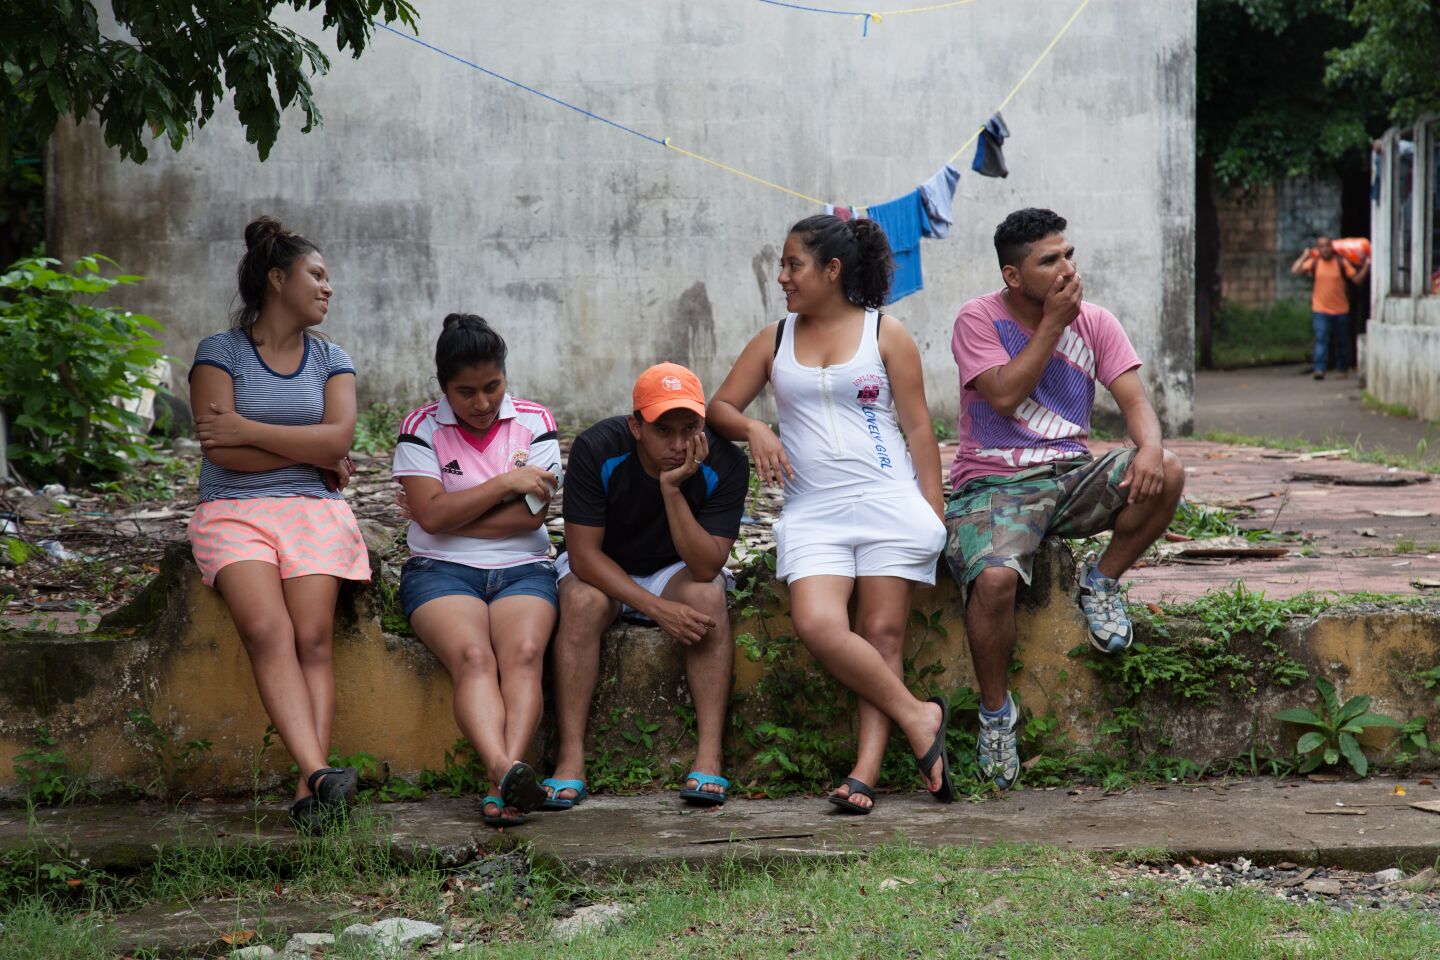 Youth from La Trinidad sit around and talk at the Jose Marti Federation school